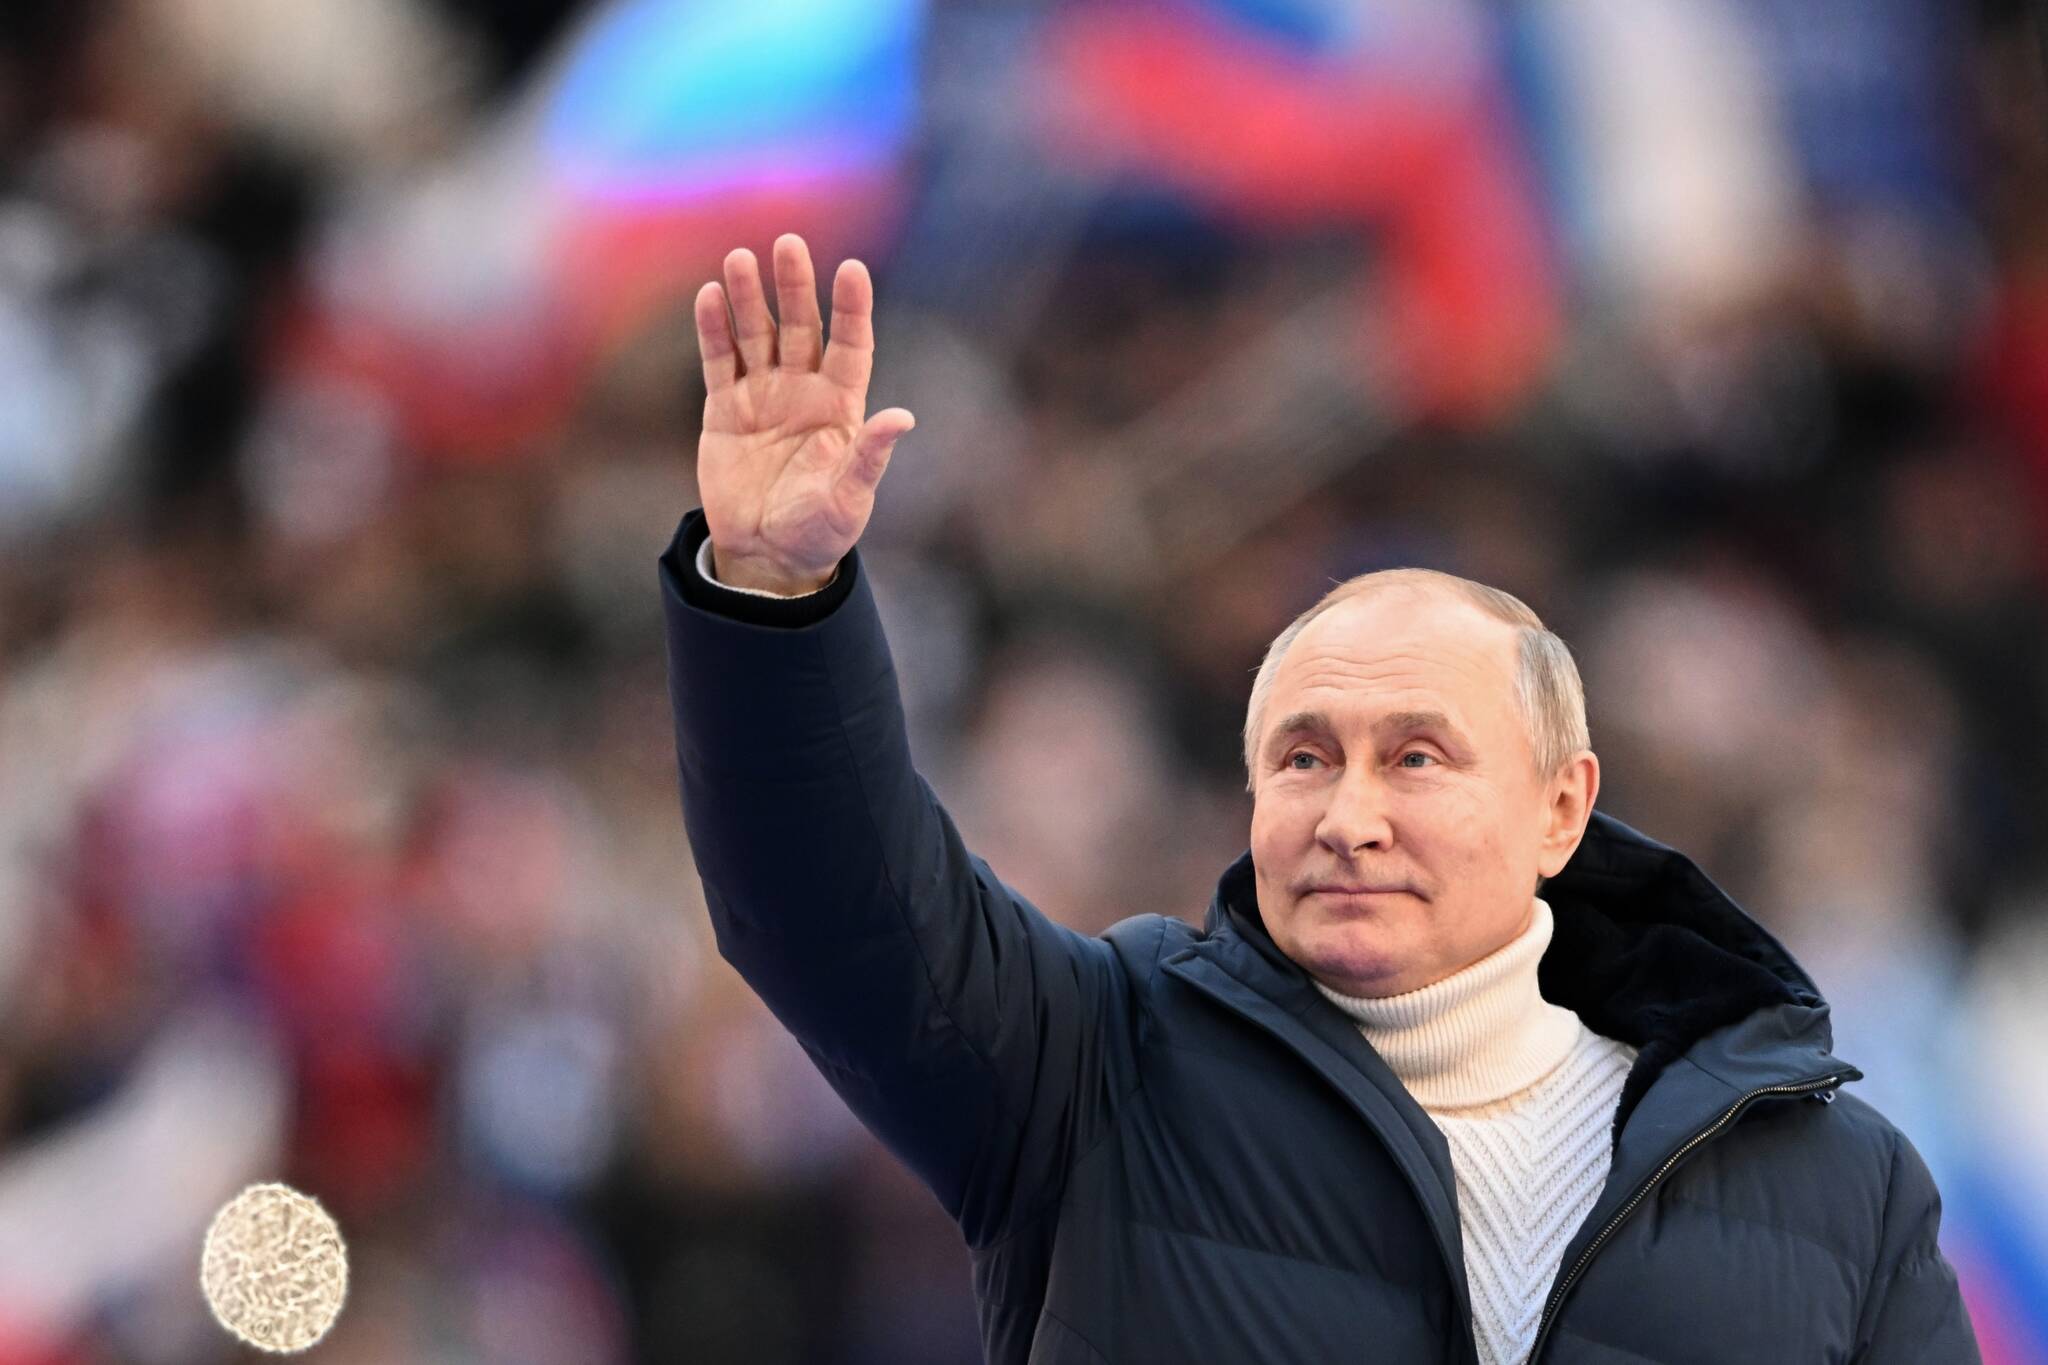 Russian President Vladimir Putin greets people gathered to attend the concert marking the eighth anniversary of the referendum on the state status of Crimea and Sevastopol and its reunification with Russia, in Moscow, Russia, Friday, March 18, 2022. (Ramil Sitdikov/Sputnik Pool Photo via AP)